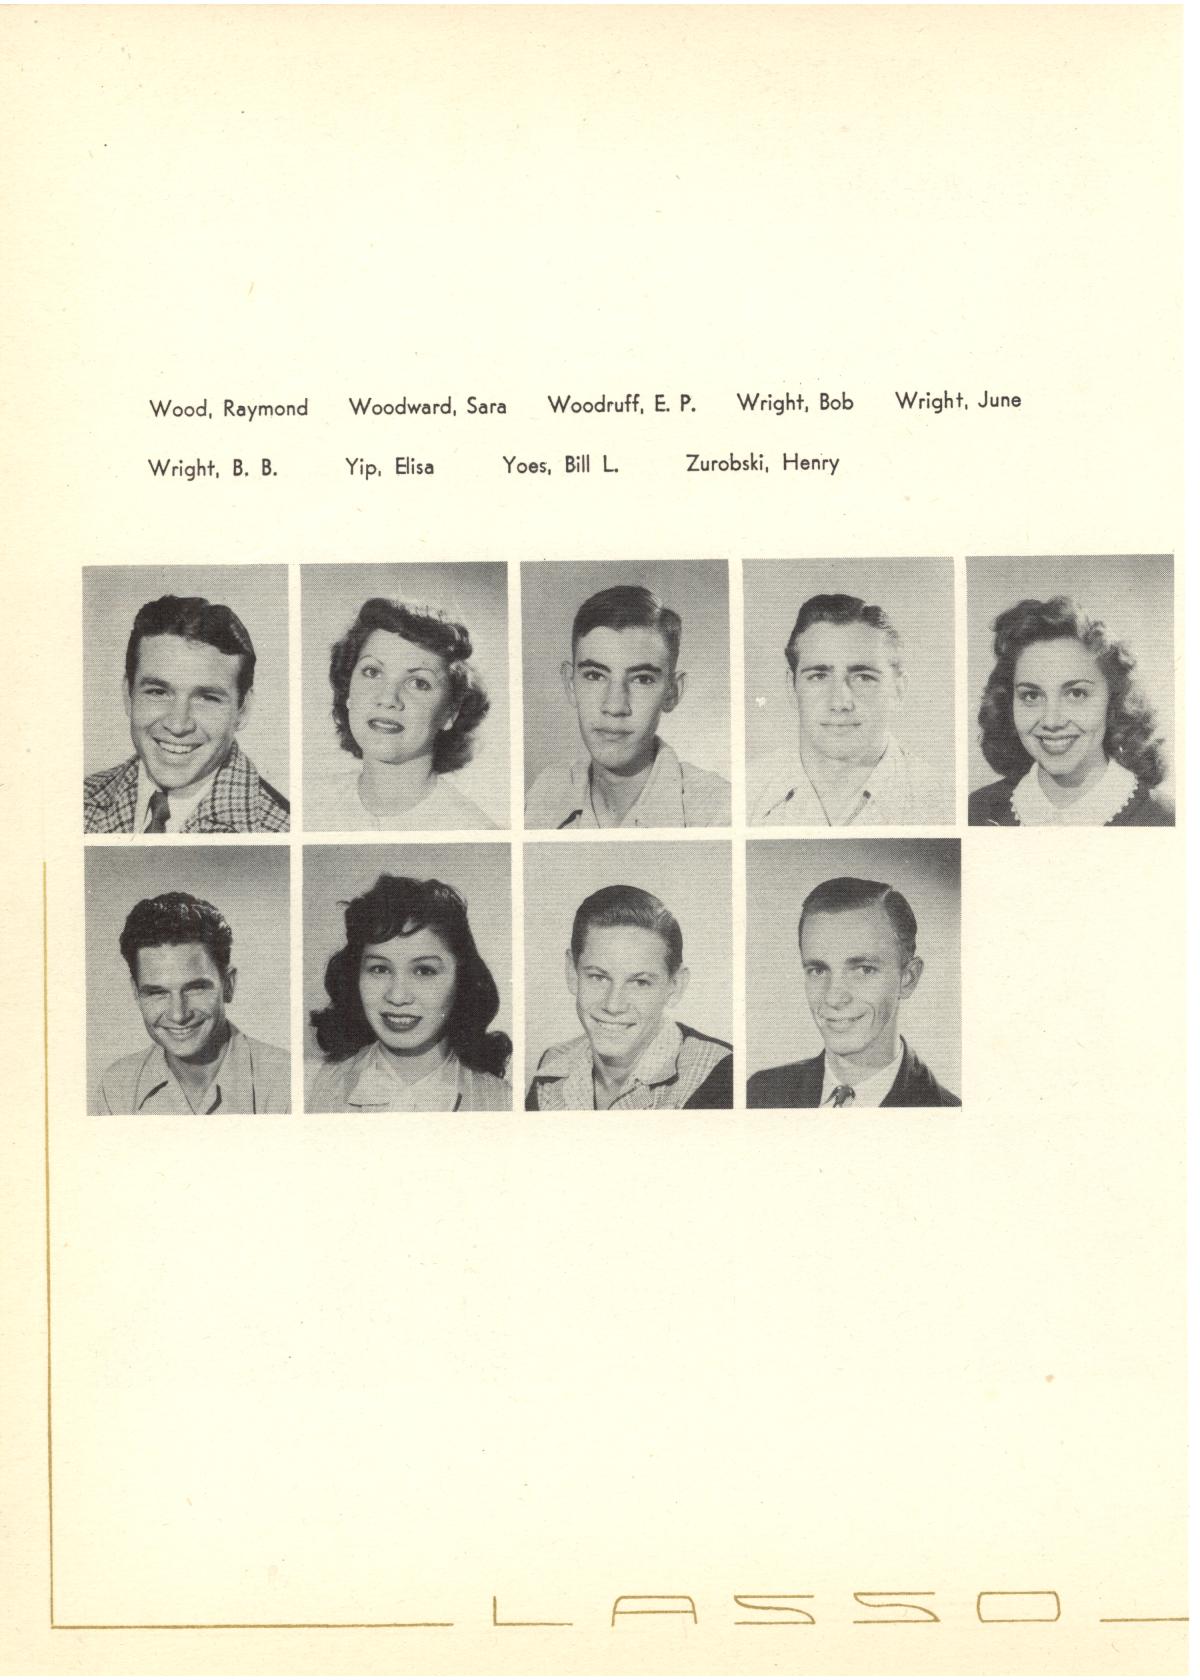 The Lasso, Yearbook of Howard Payne College, 1947
                                                
                                                    66
                                                